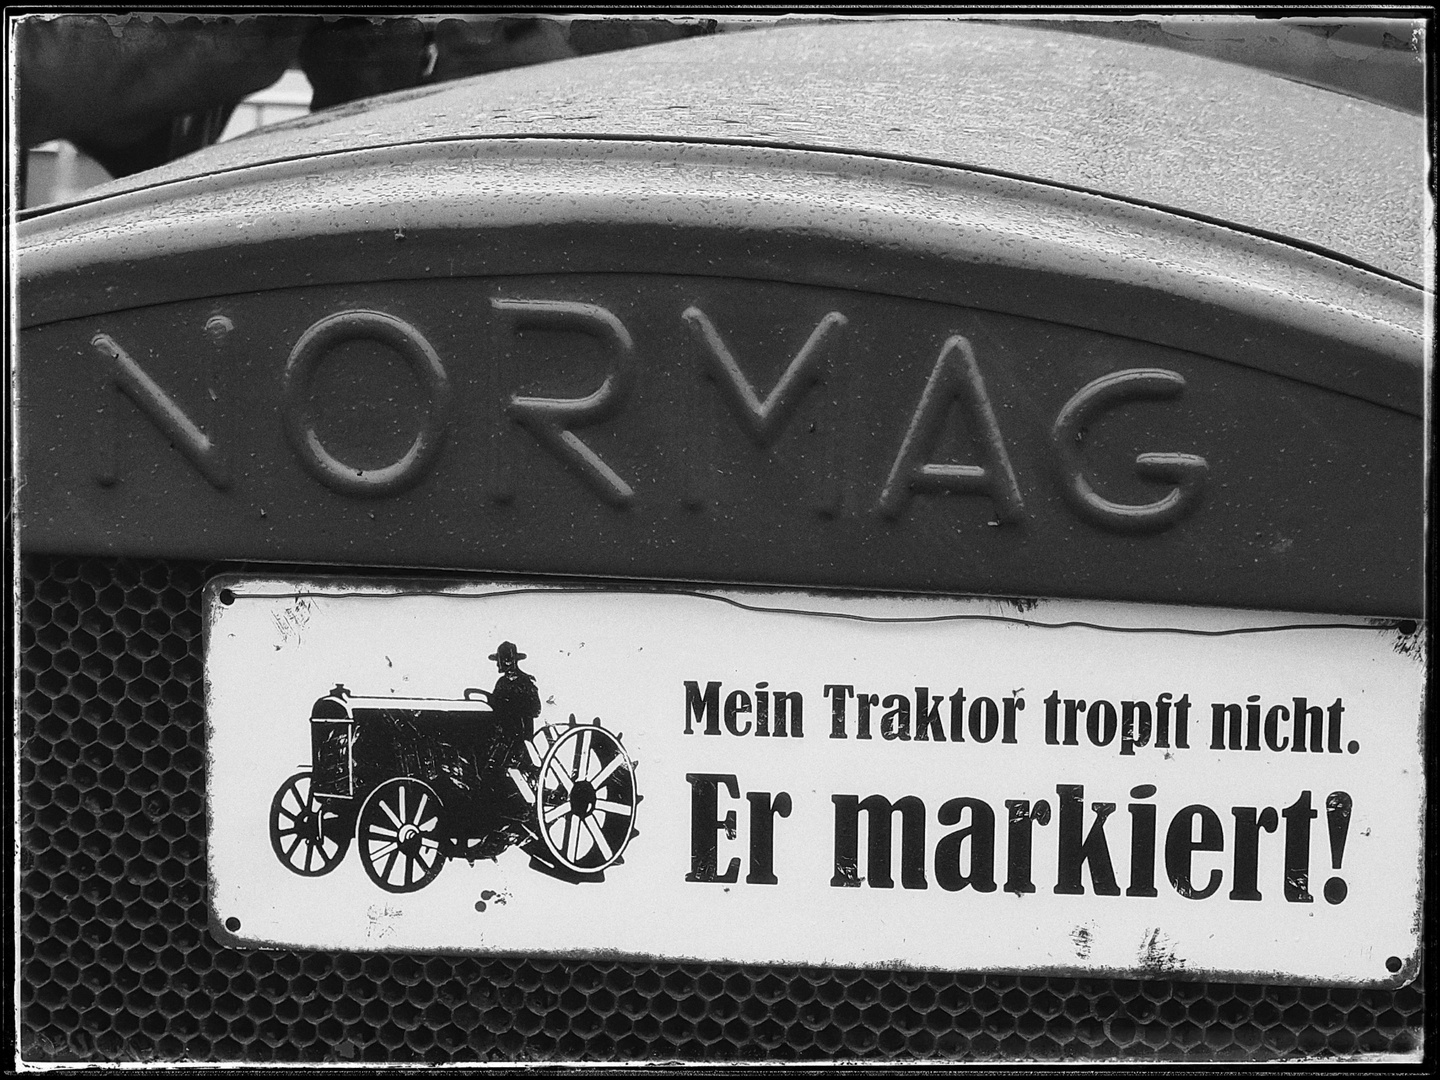 NORMAG